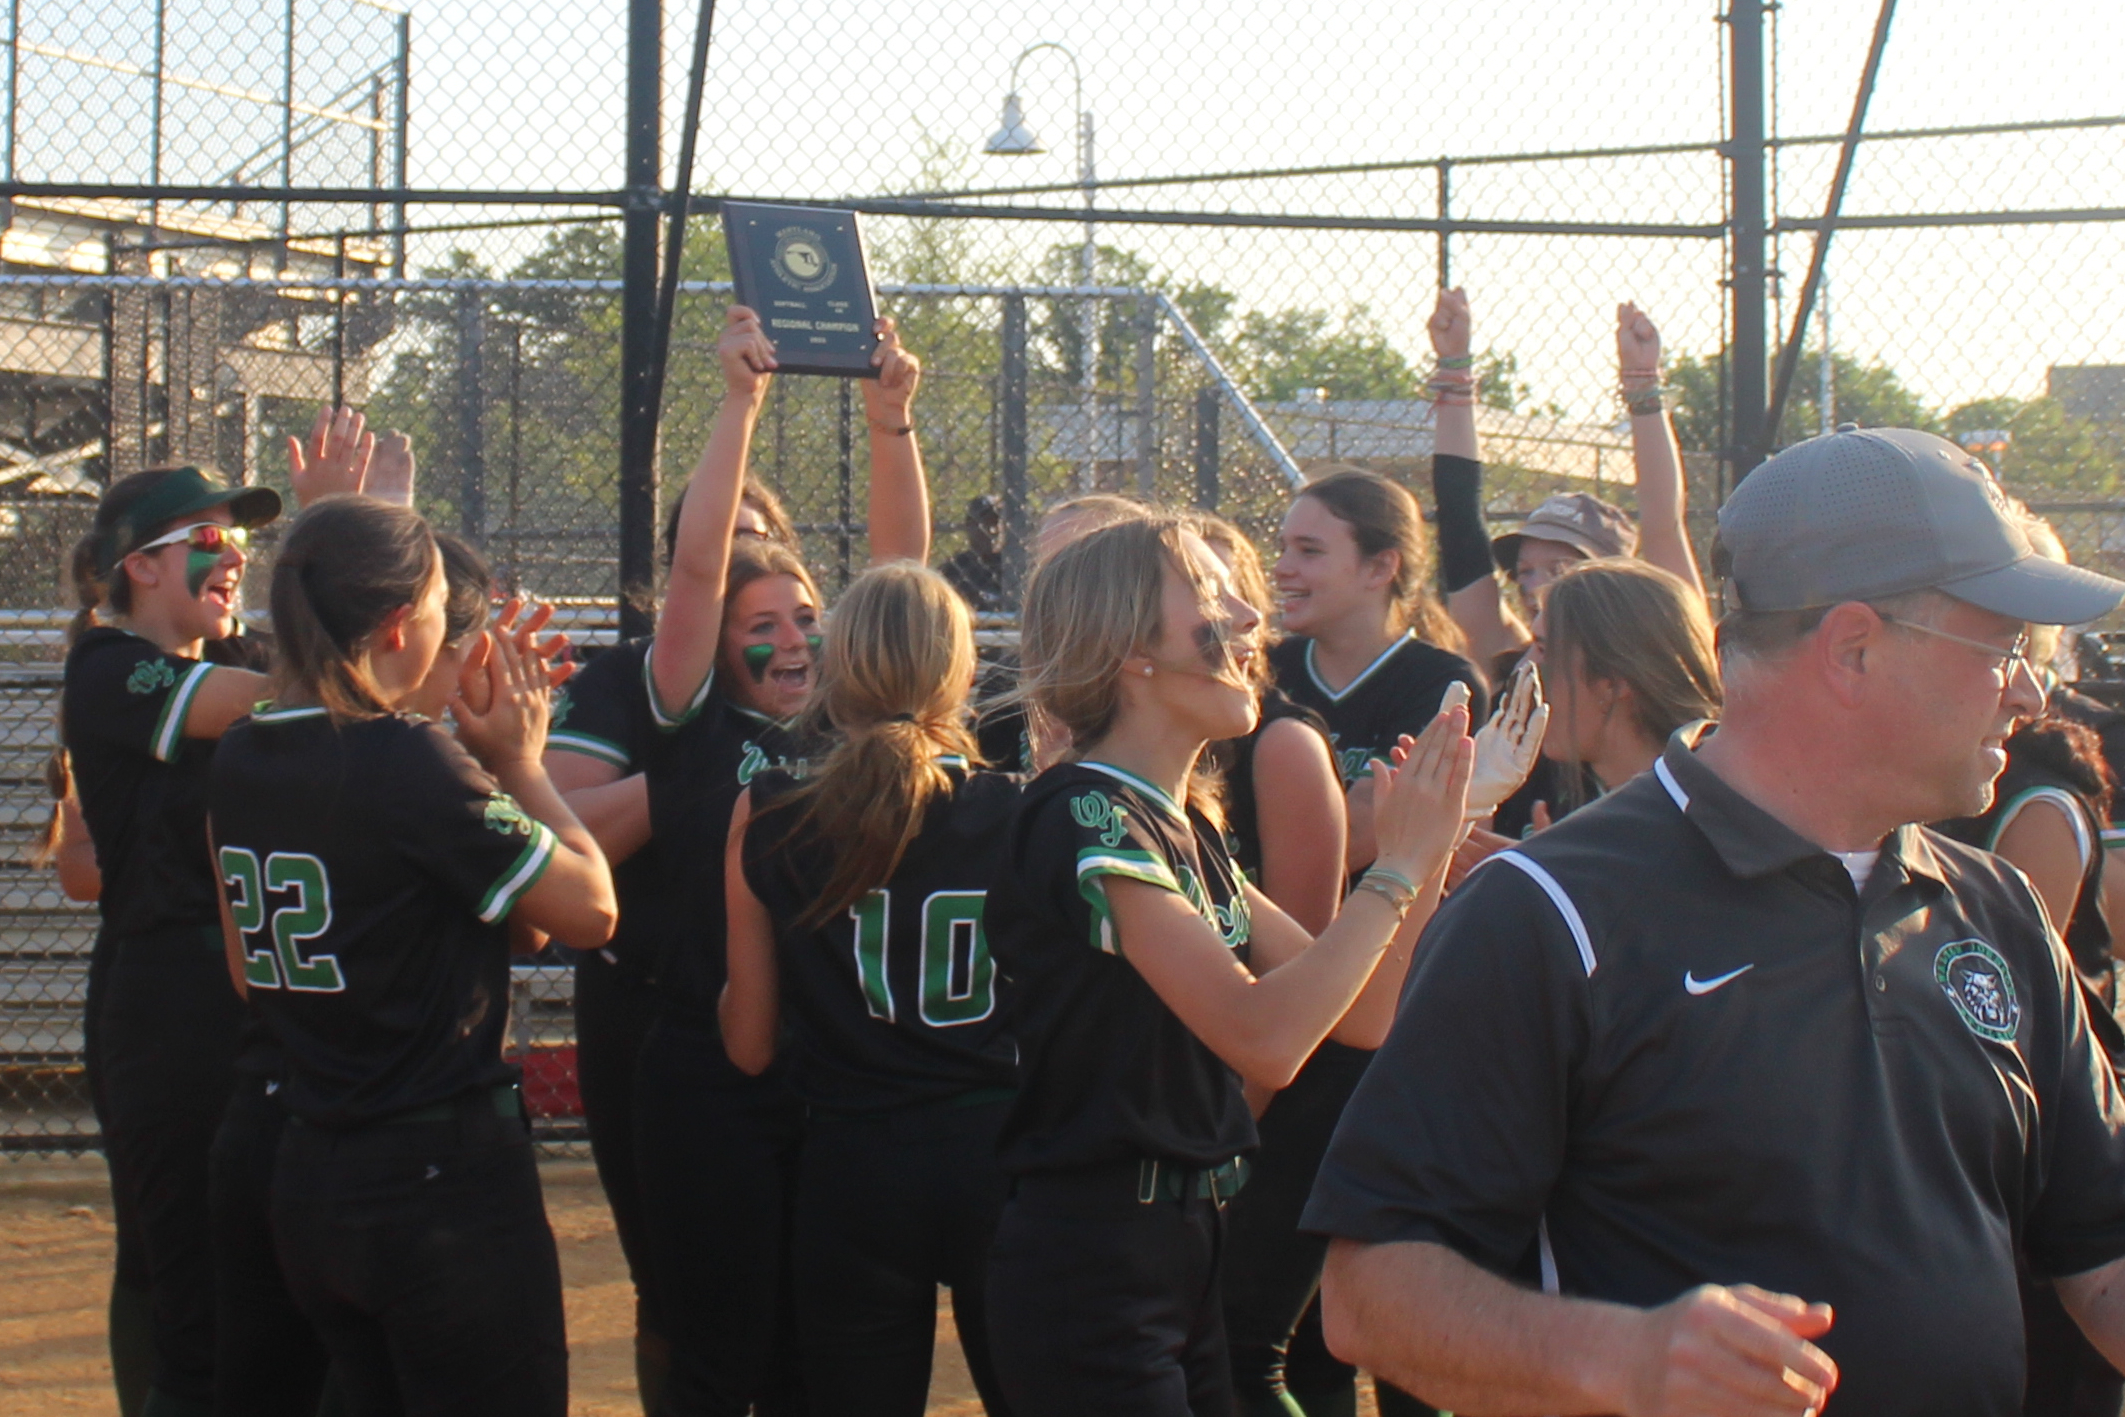 Team captain and starting pitcher Sami Rosenberg lifts the region champion plaque over her head as teammates celebrate. WJ softball won its region in 2023, a feat the team hopes to repeat this year.